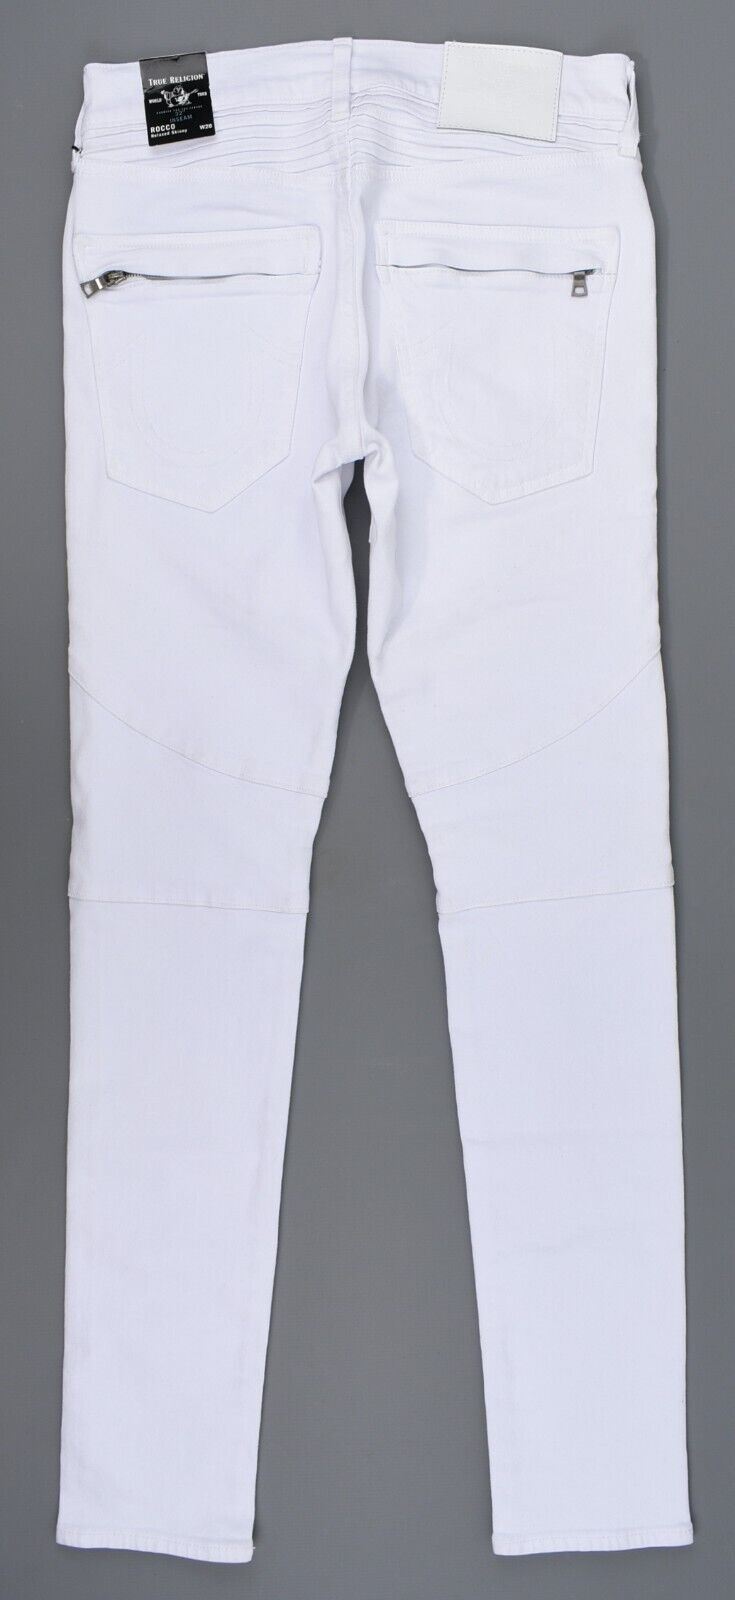 TRUE RELIGION Men's ROCCO relaxed Skinny Jeans, White, size W28 L32